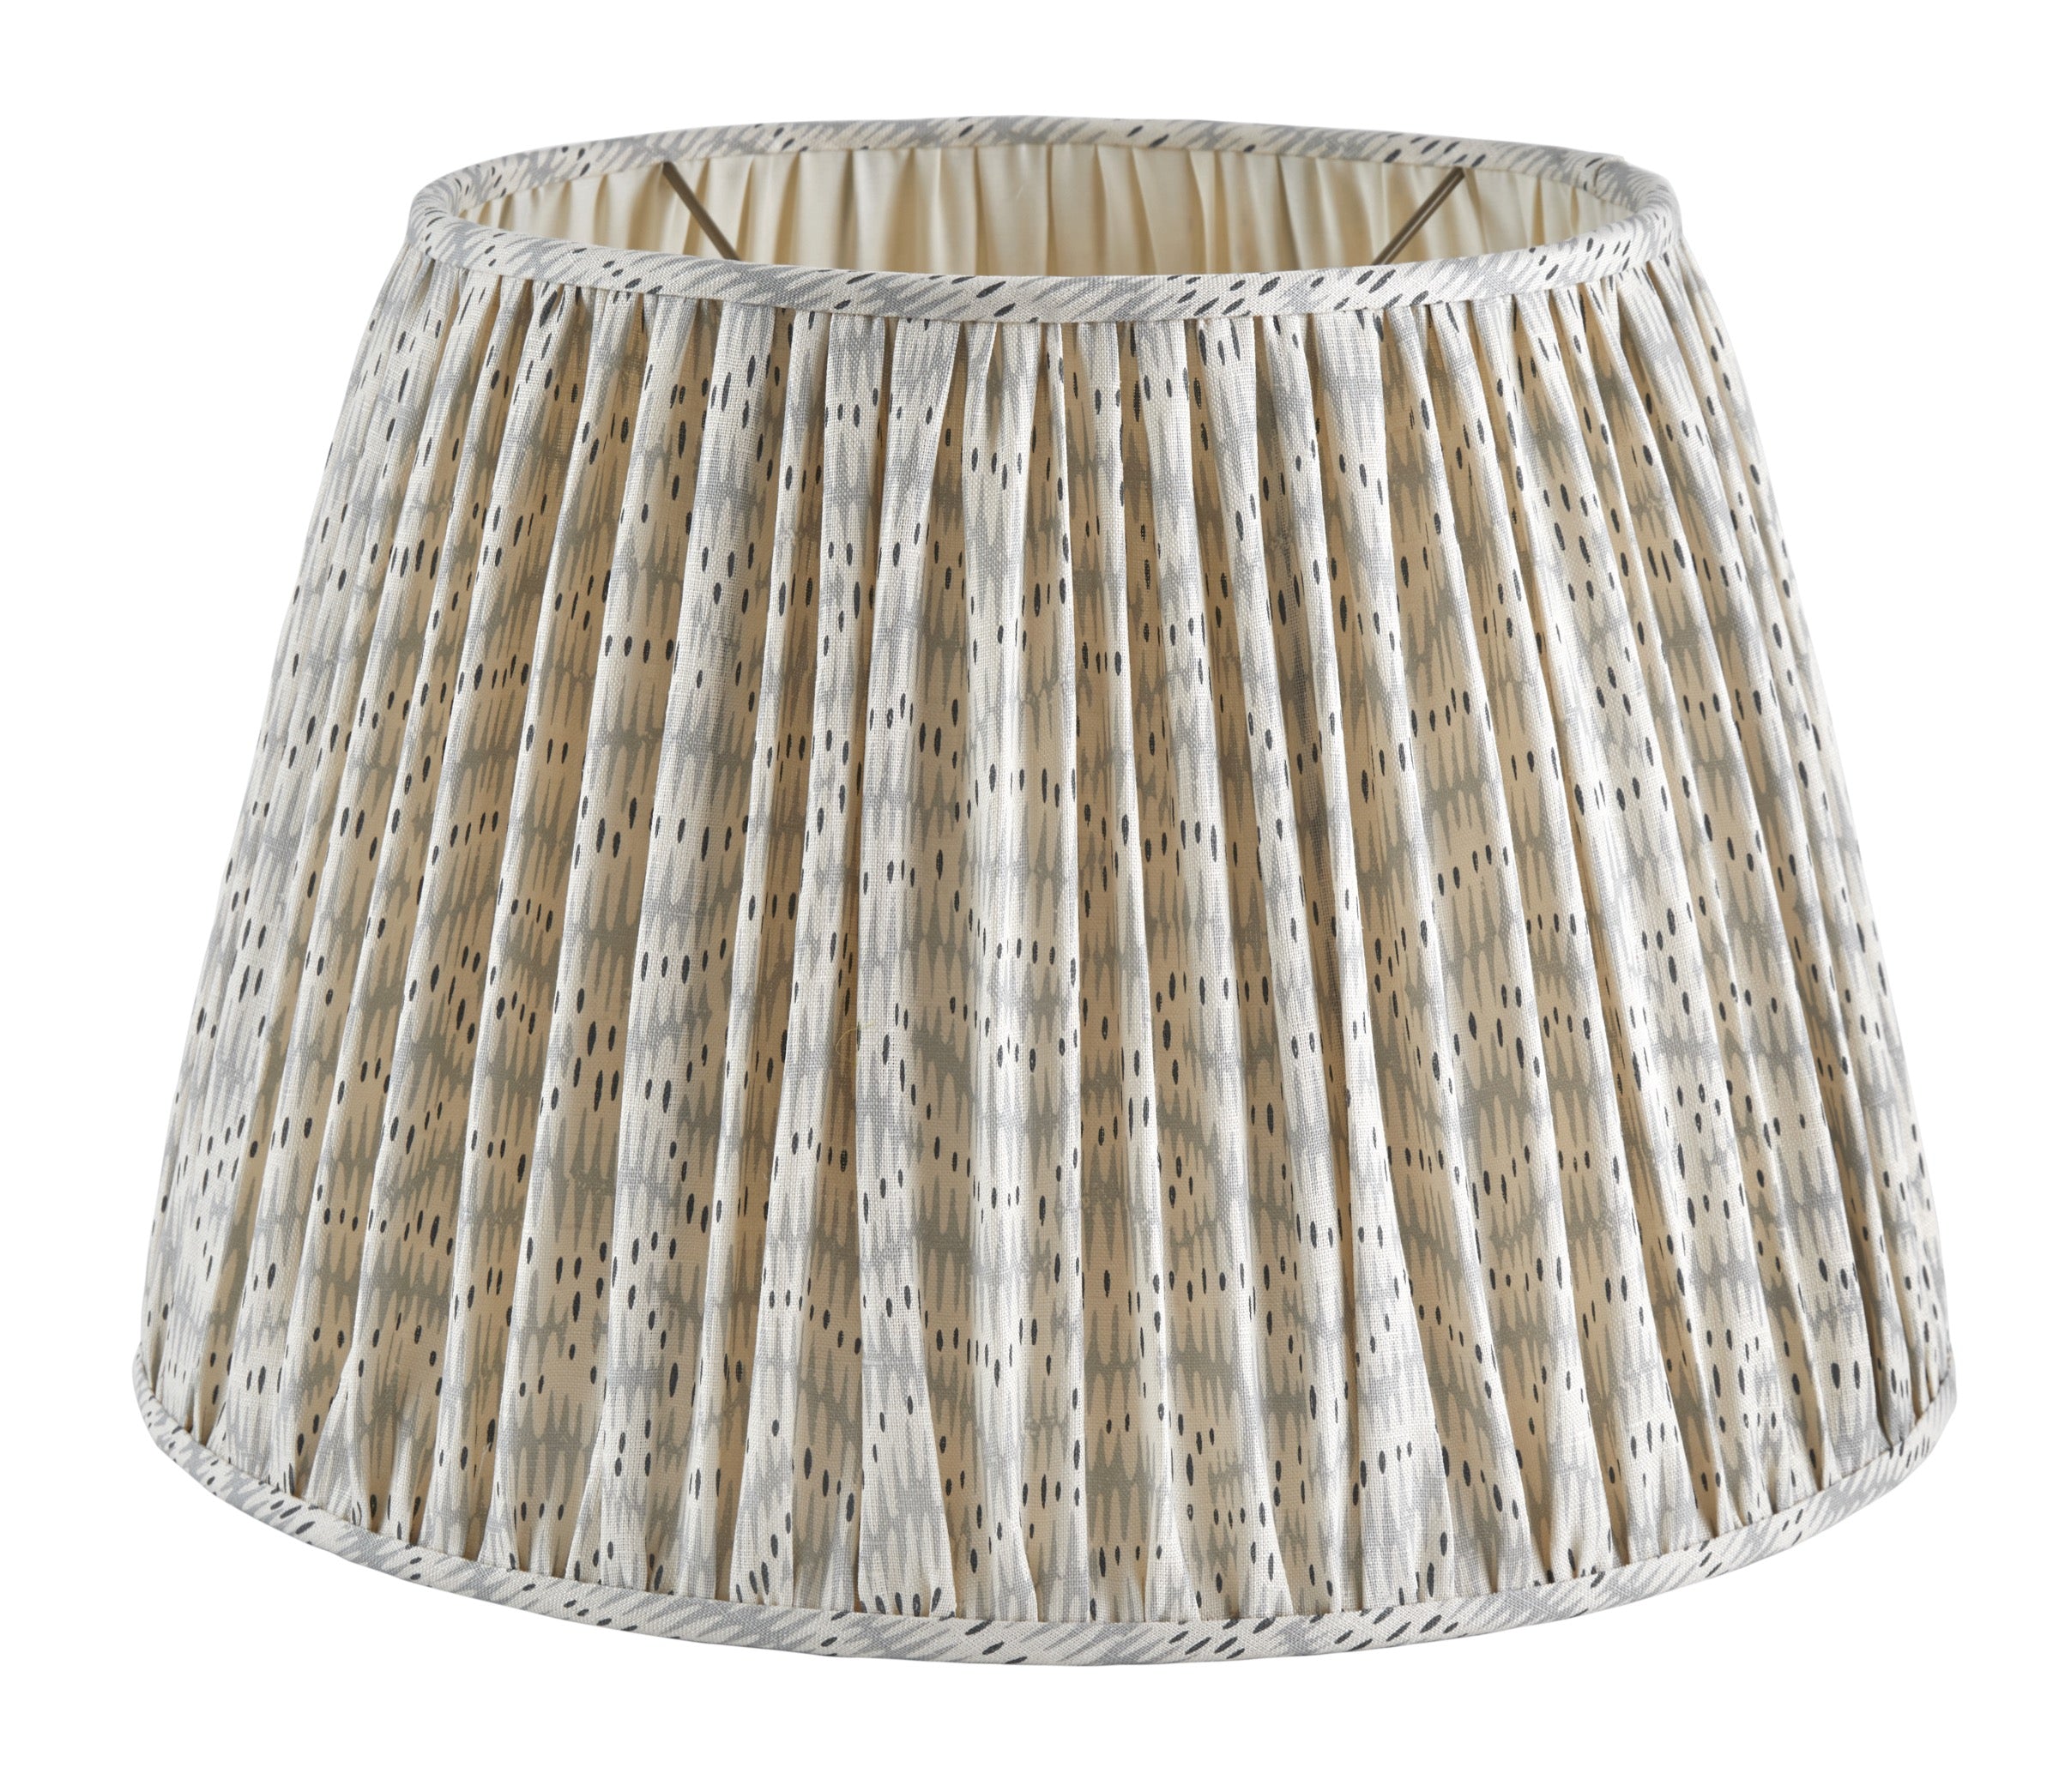 Daphne's Feathers Slate Blue Lampshade